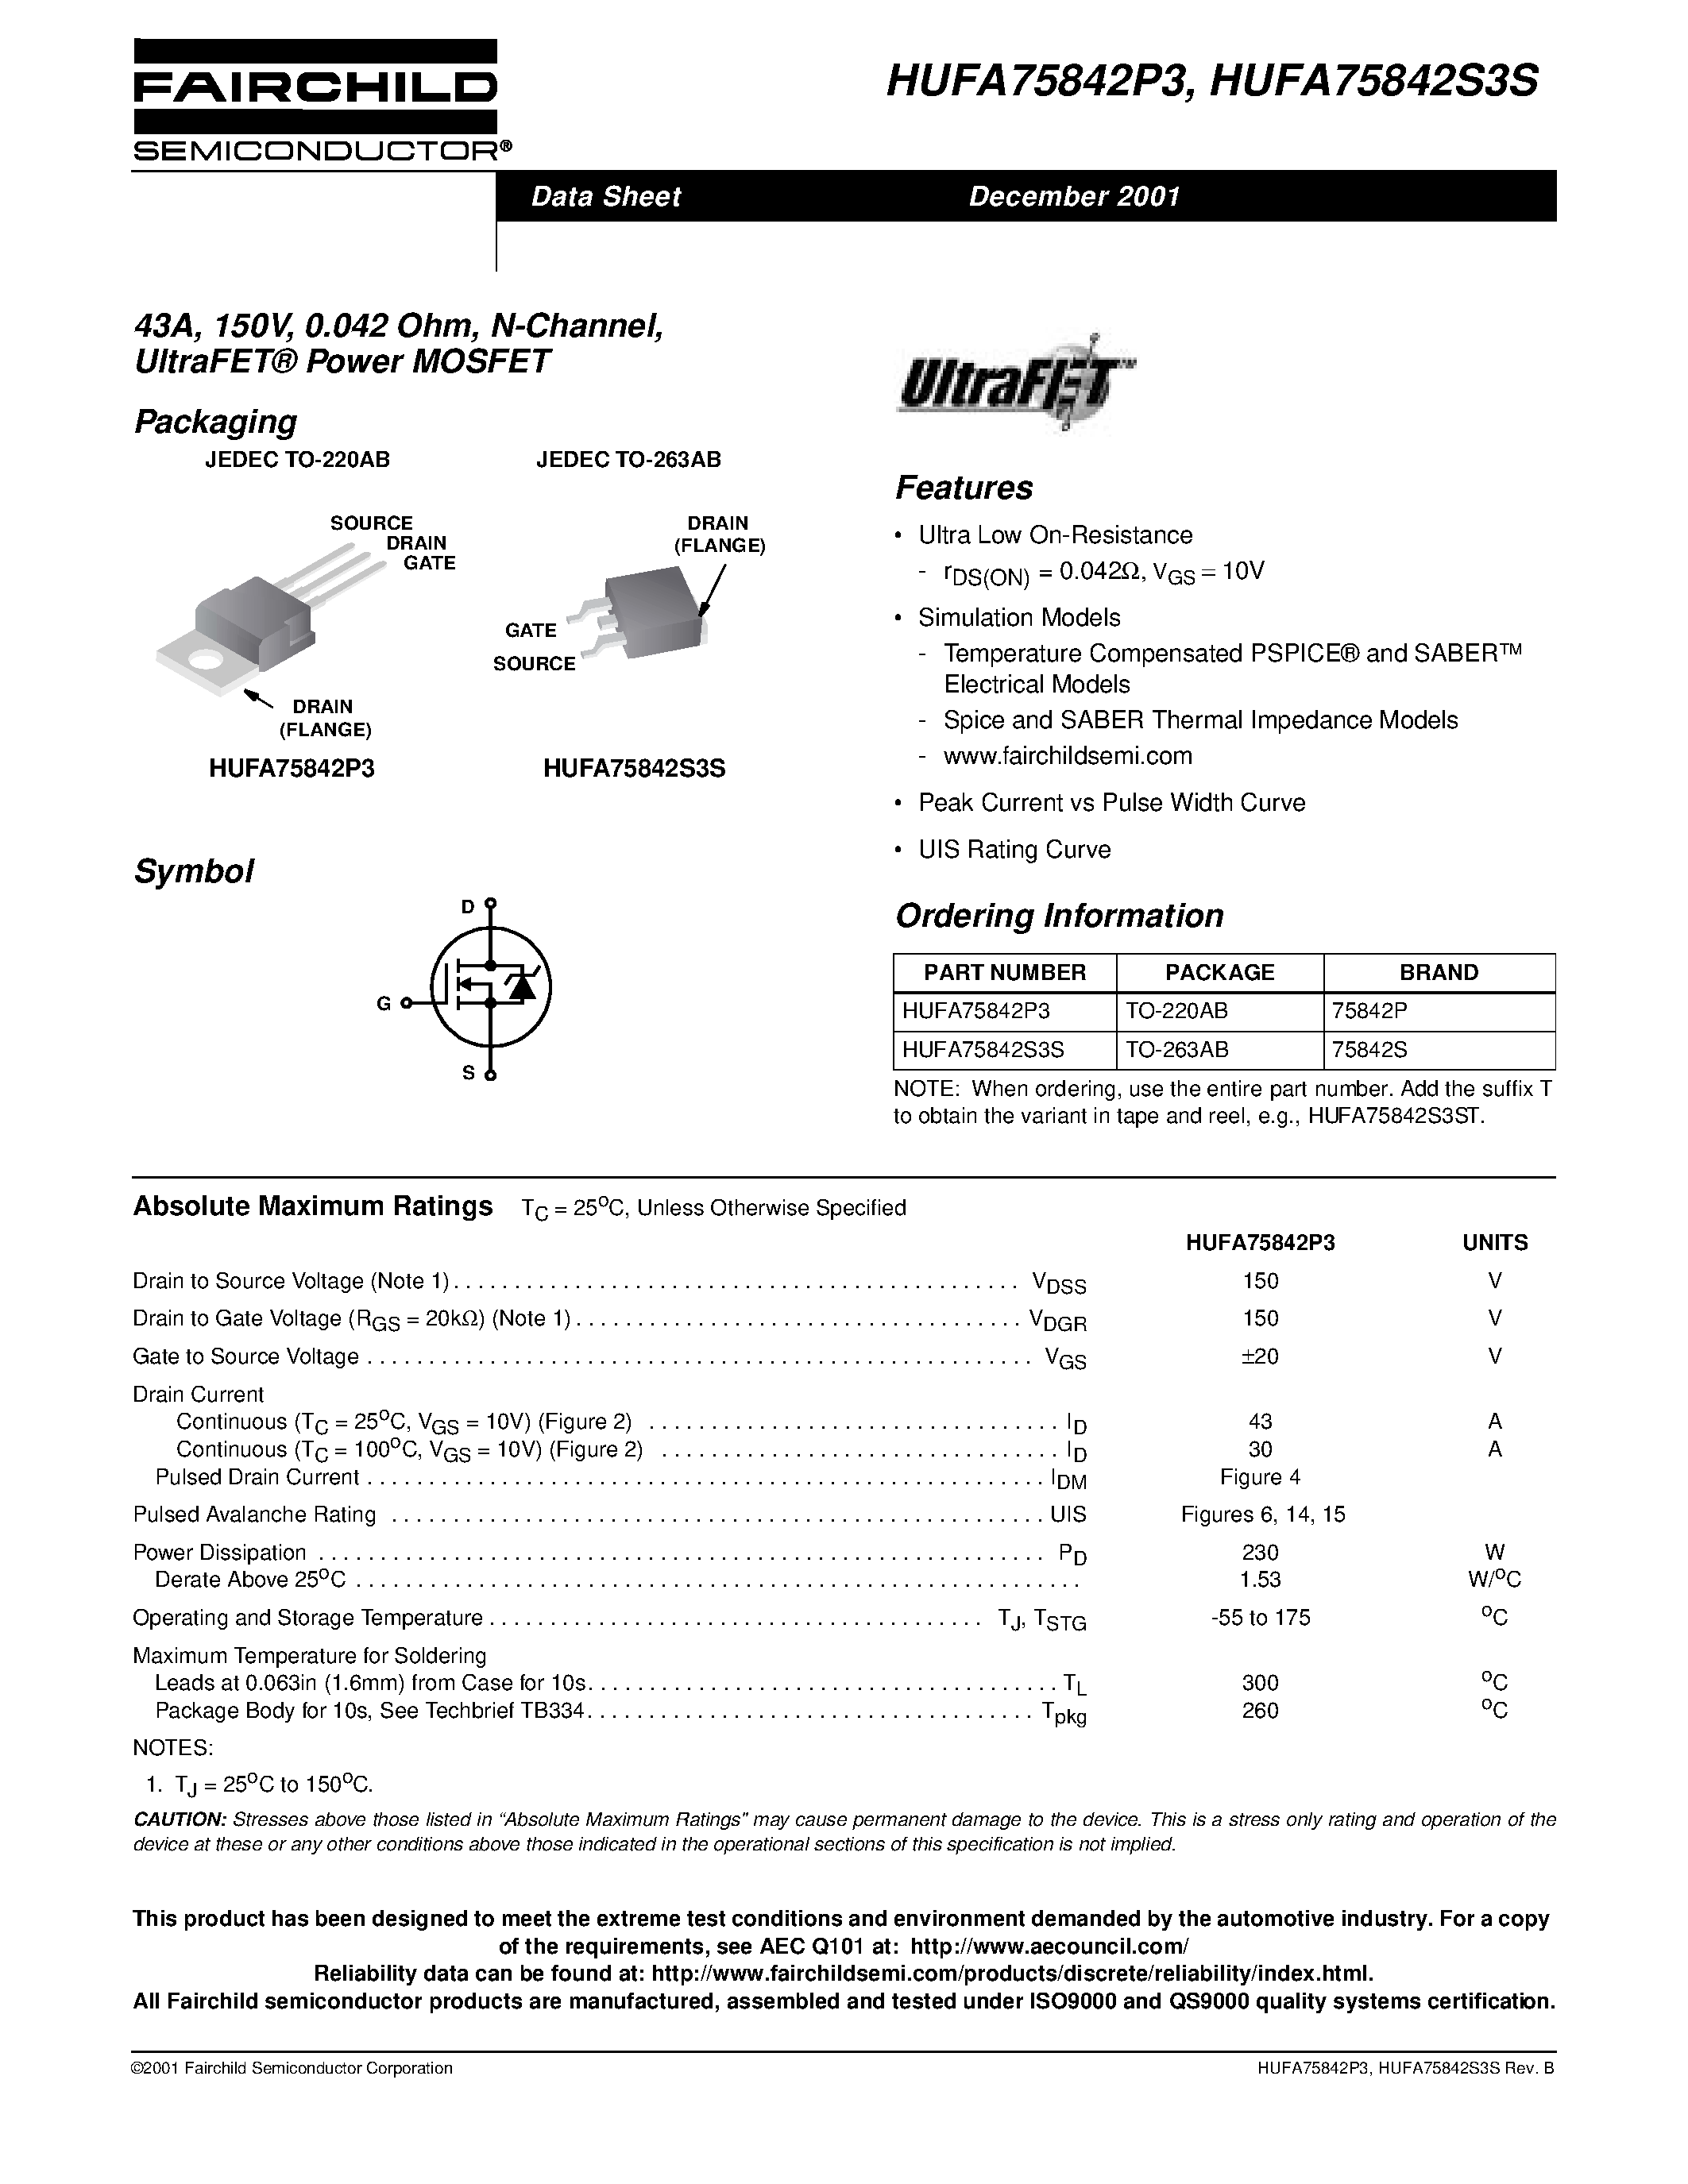 Datasheet HUFA75842S3S - 43A/ 150V/ 0.042 Ohm/ N-Channel/ UltraFET Power MOSFET page 1